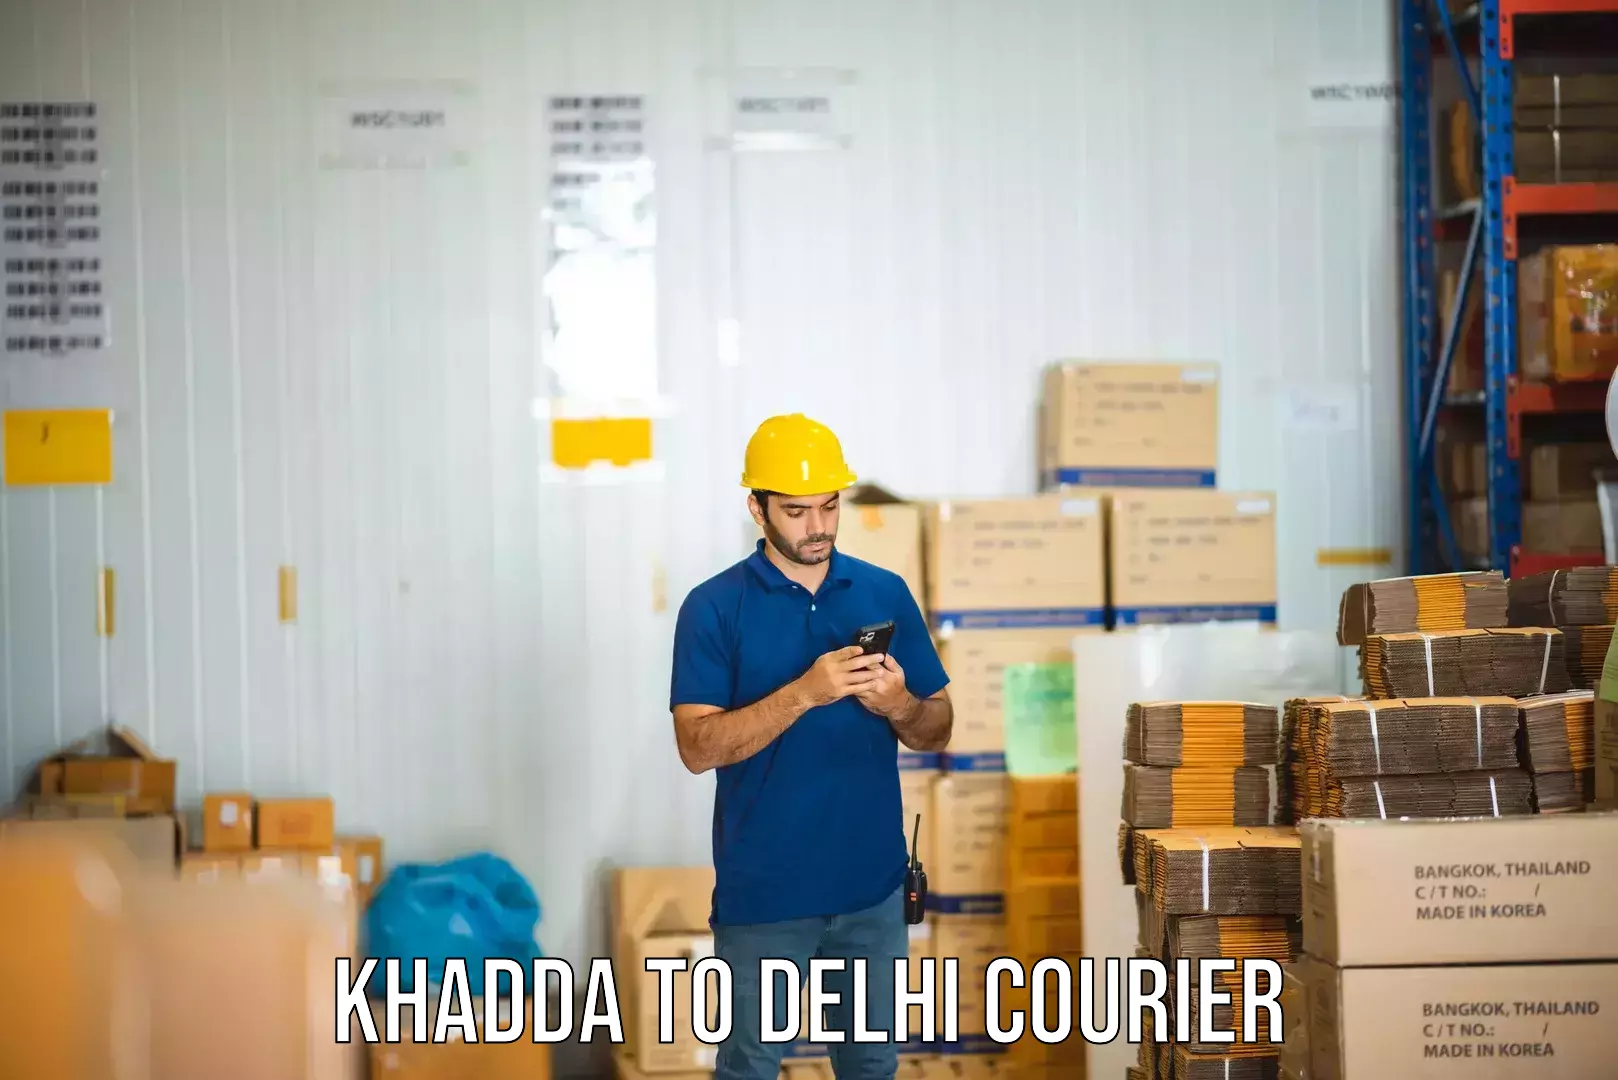 Efficient package consolidation Khadda to NCR